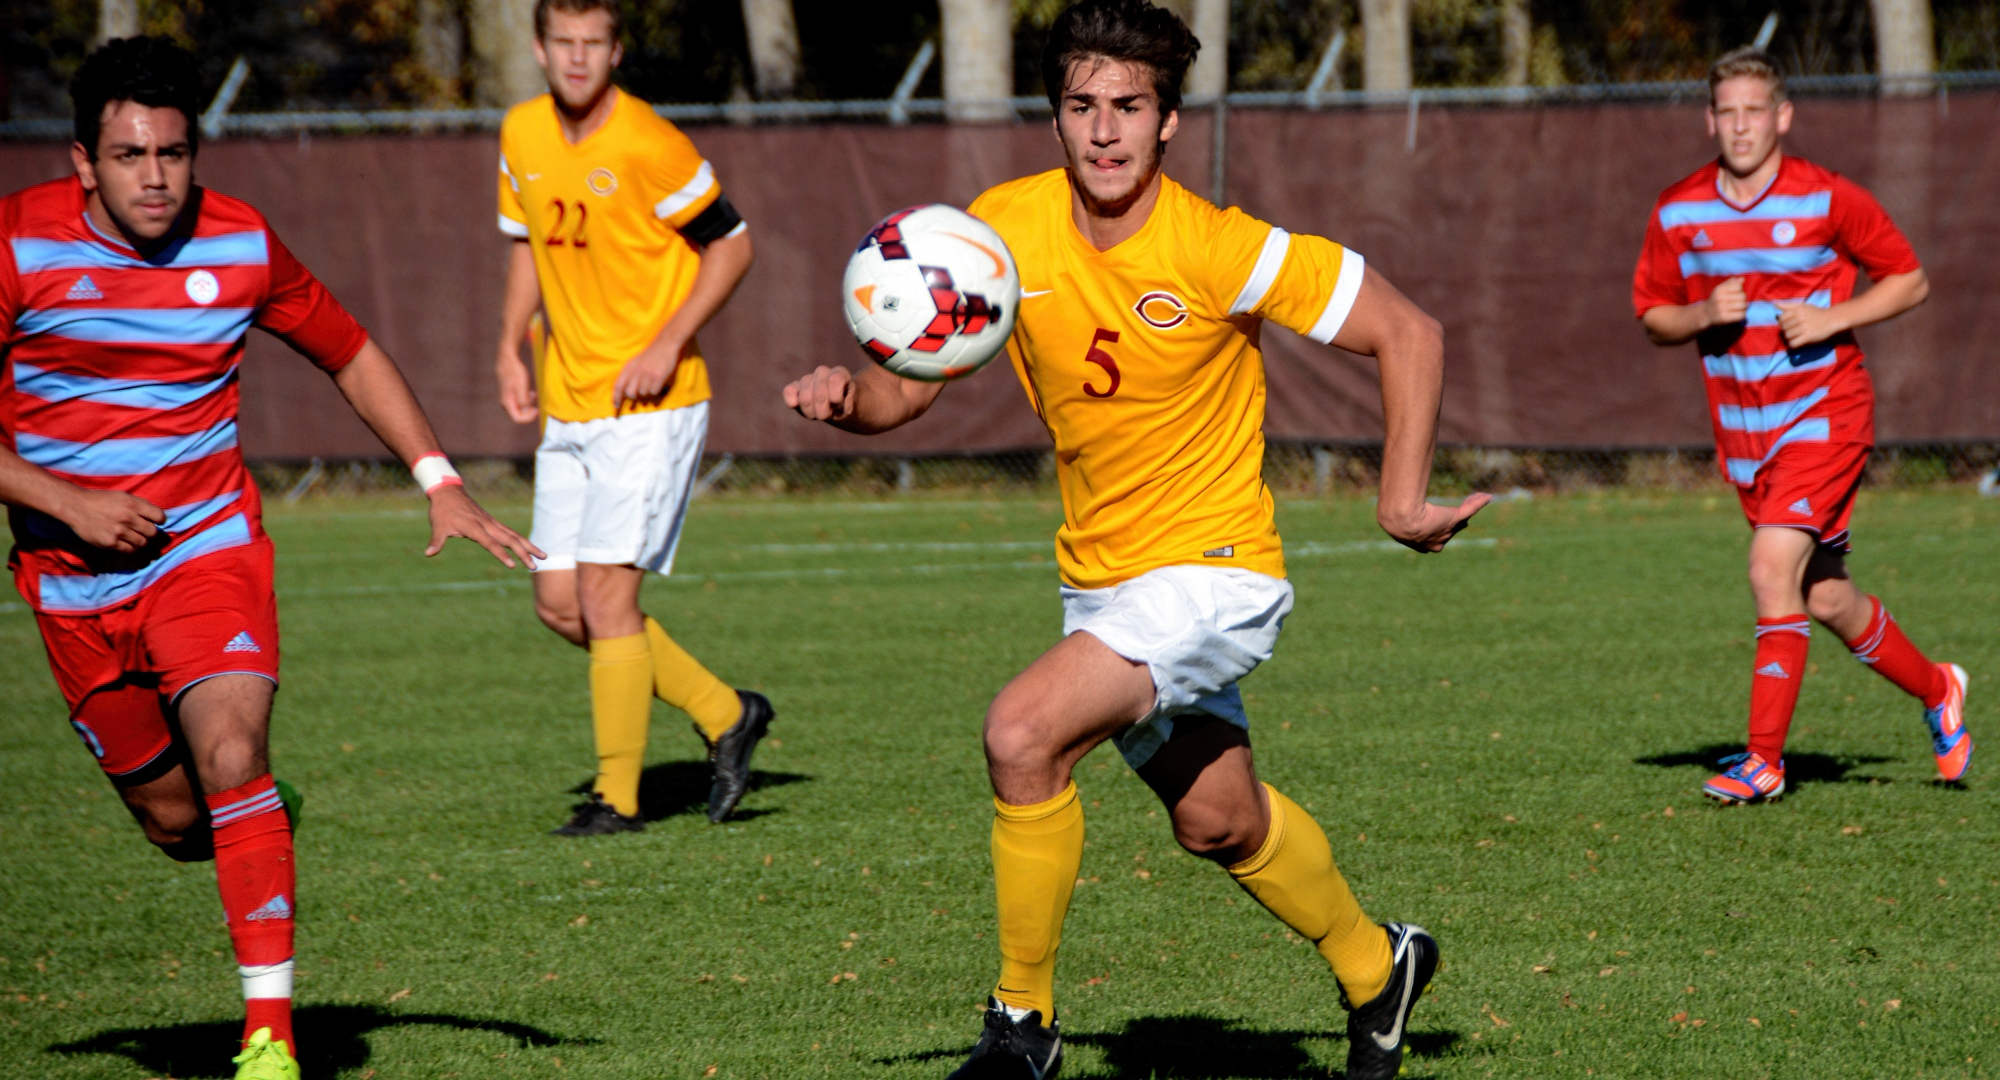 Senior Matthew Fulks had two shots in the Cobbers' game at St. John's.